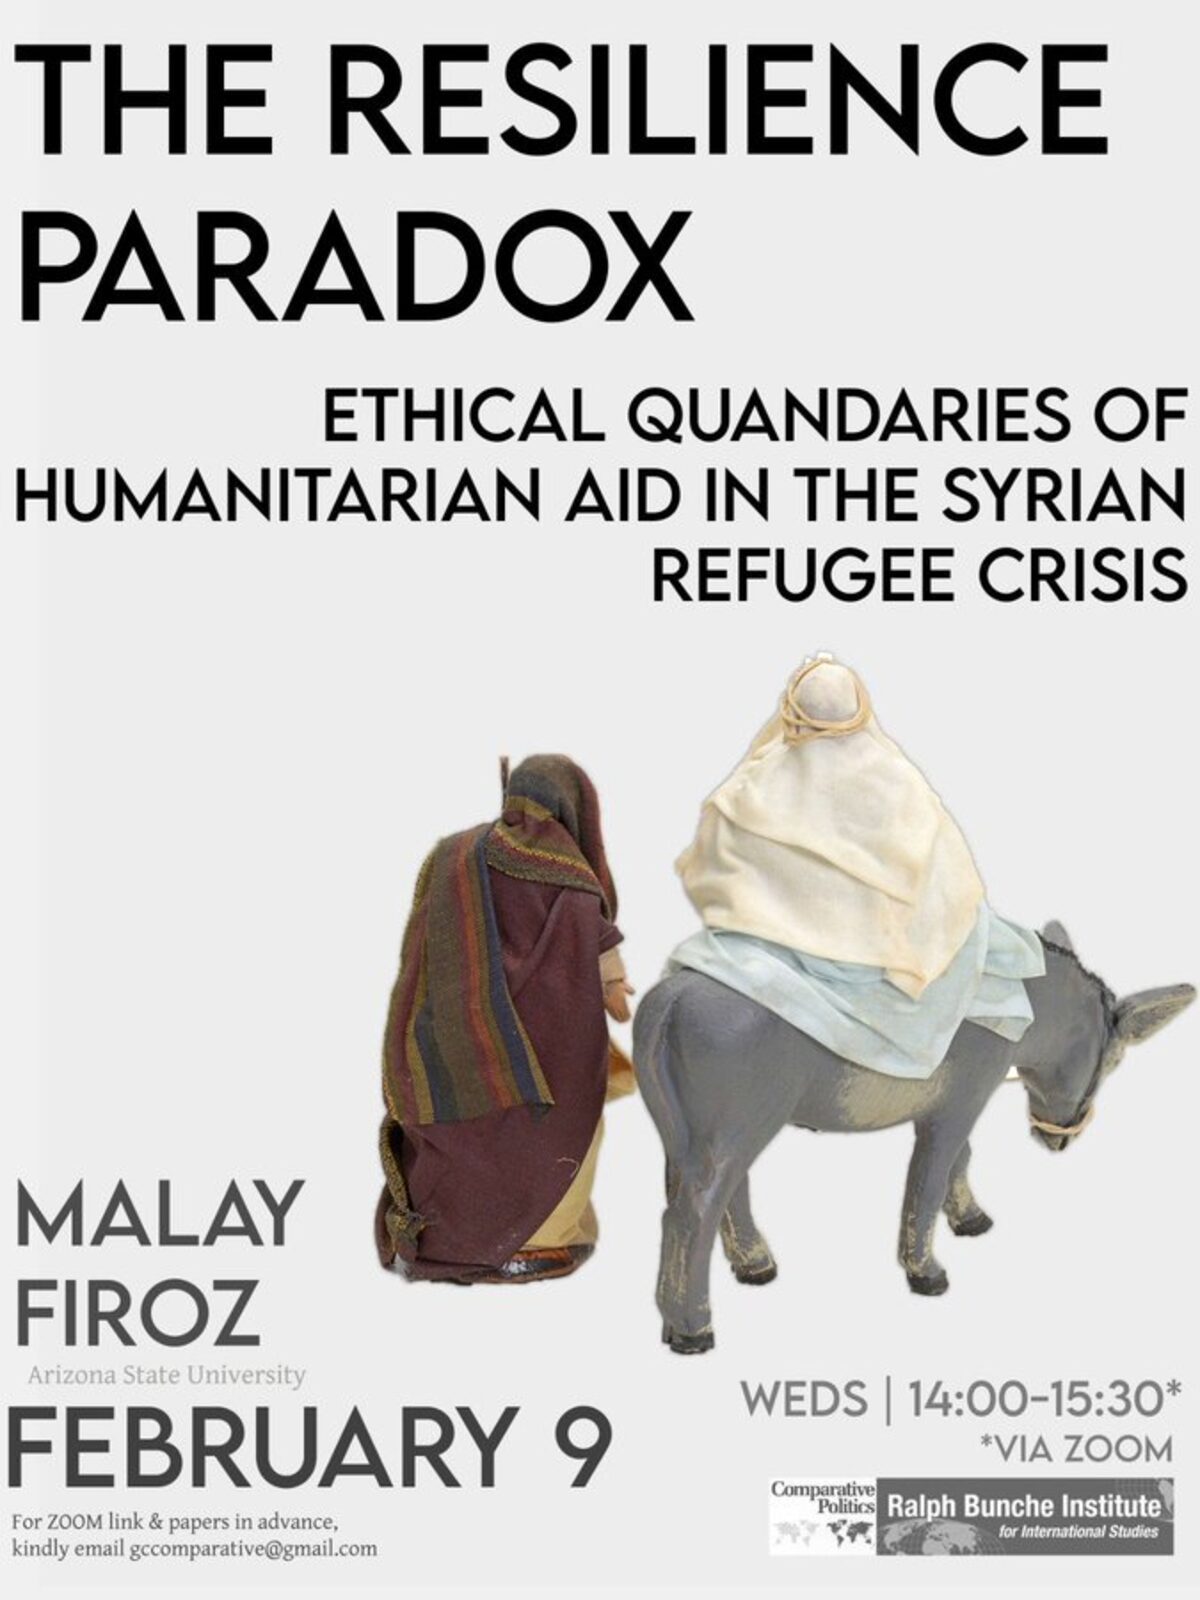 Comparative Politics Workshop: Malay Firoz, "The Resilience Paradox: Ethical Quandaries of Humanitarian Aid in the Syrian Refugee Crisis," Wednesday, February 9, 2-3:30pm EST